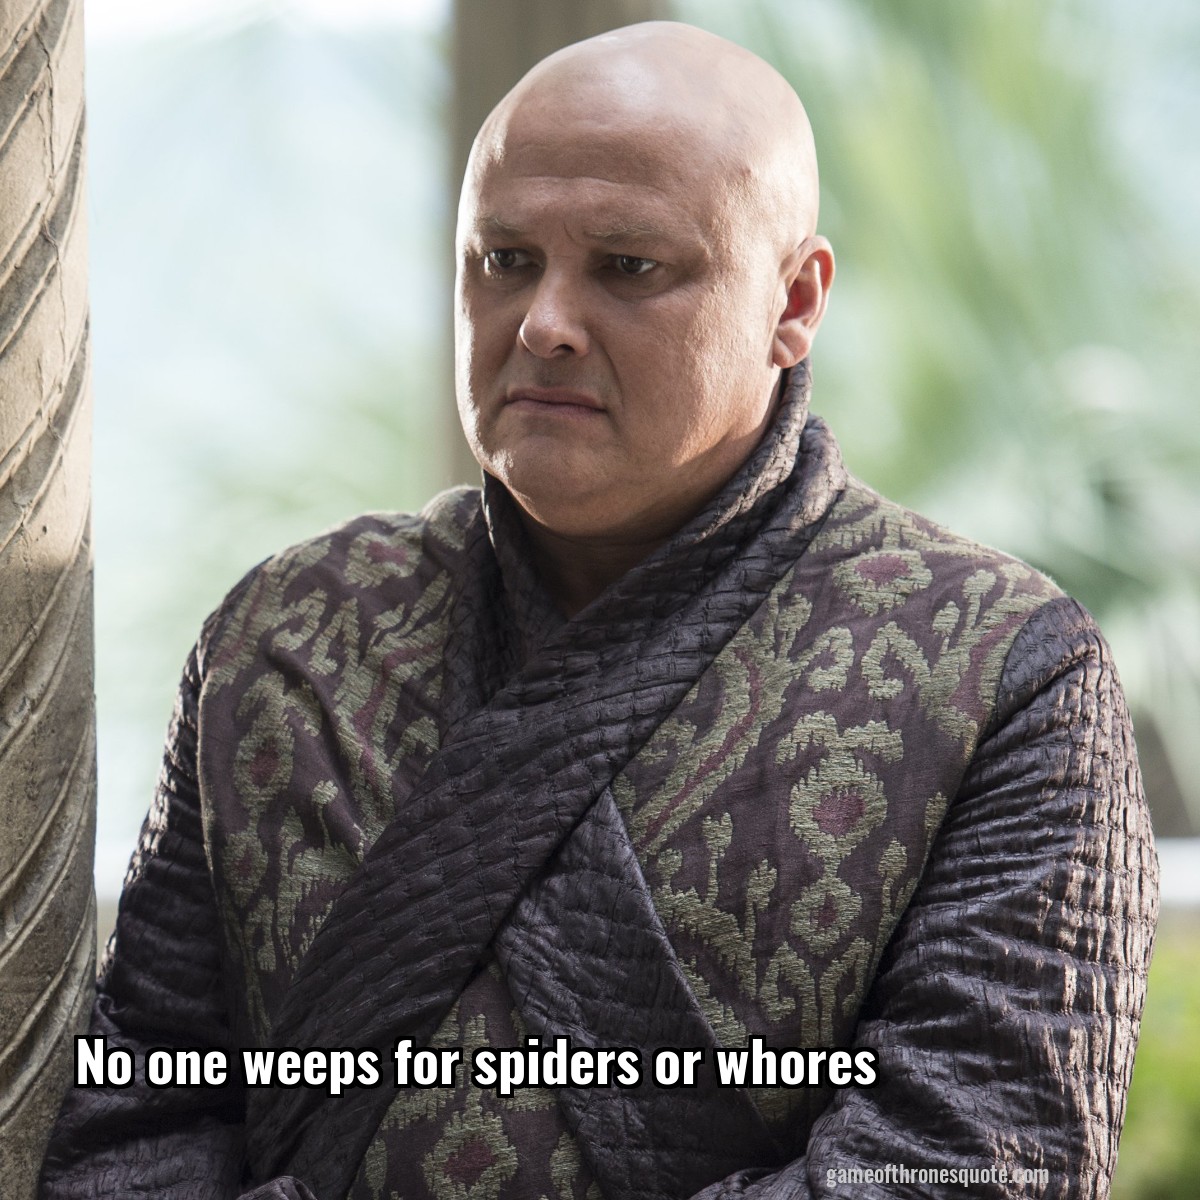 No one weeps for spiders or whores